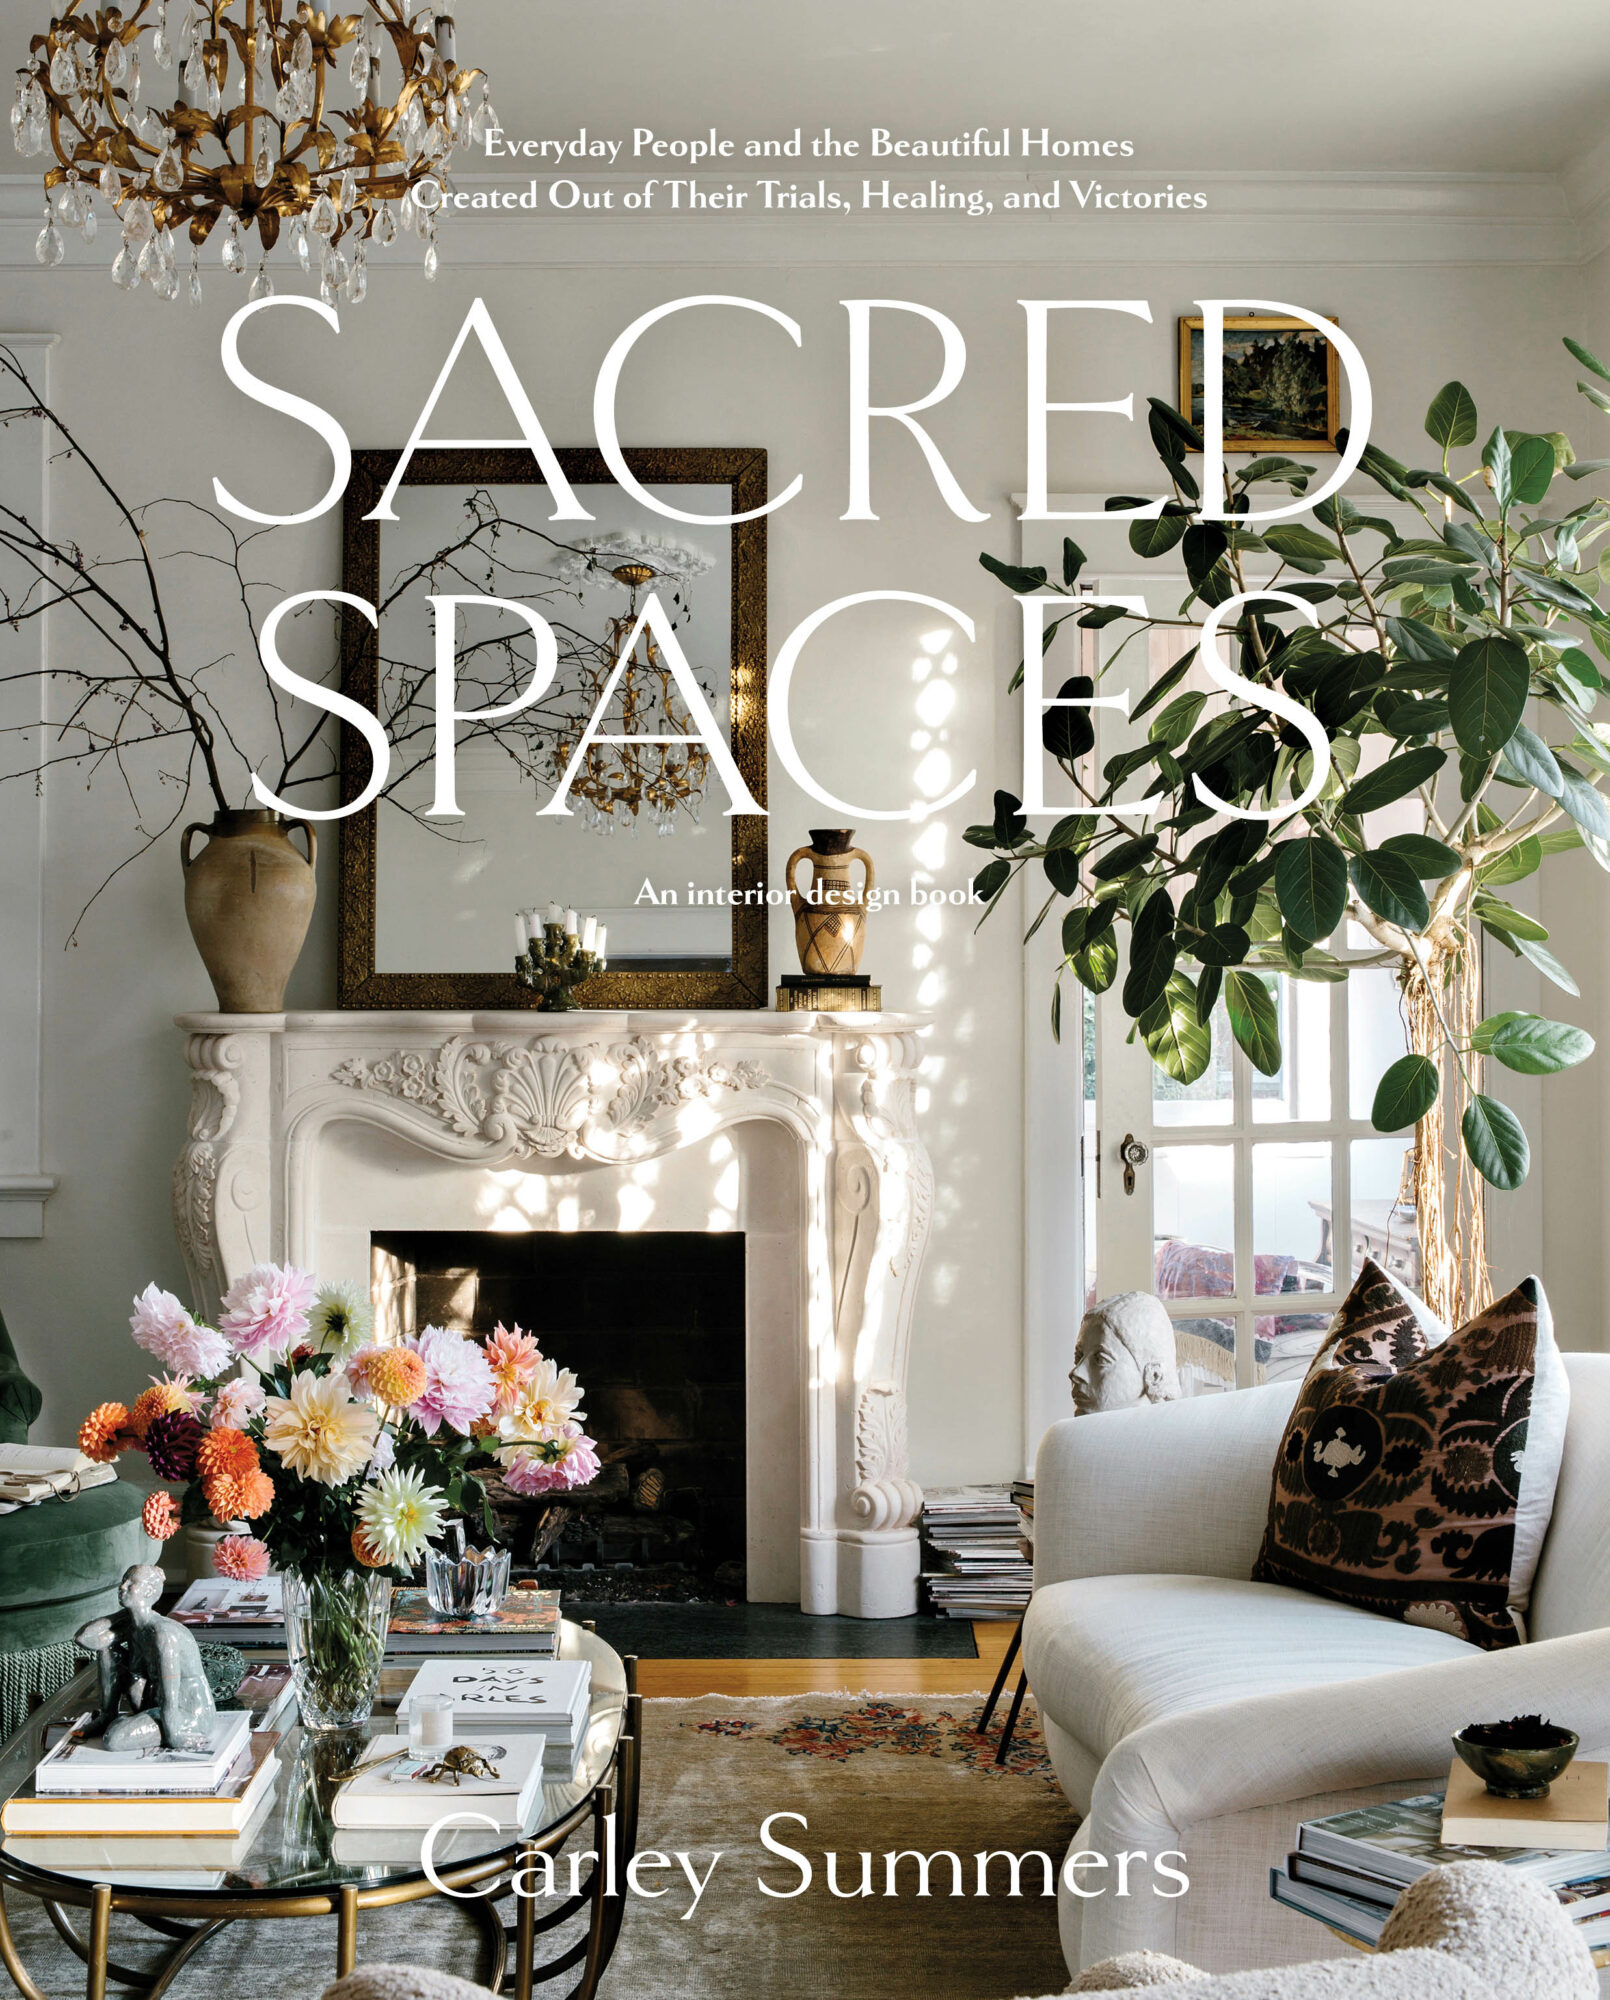 Sacred Spaces design book cover featuring a living room with a white fireplace, sofa and coffee table